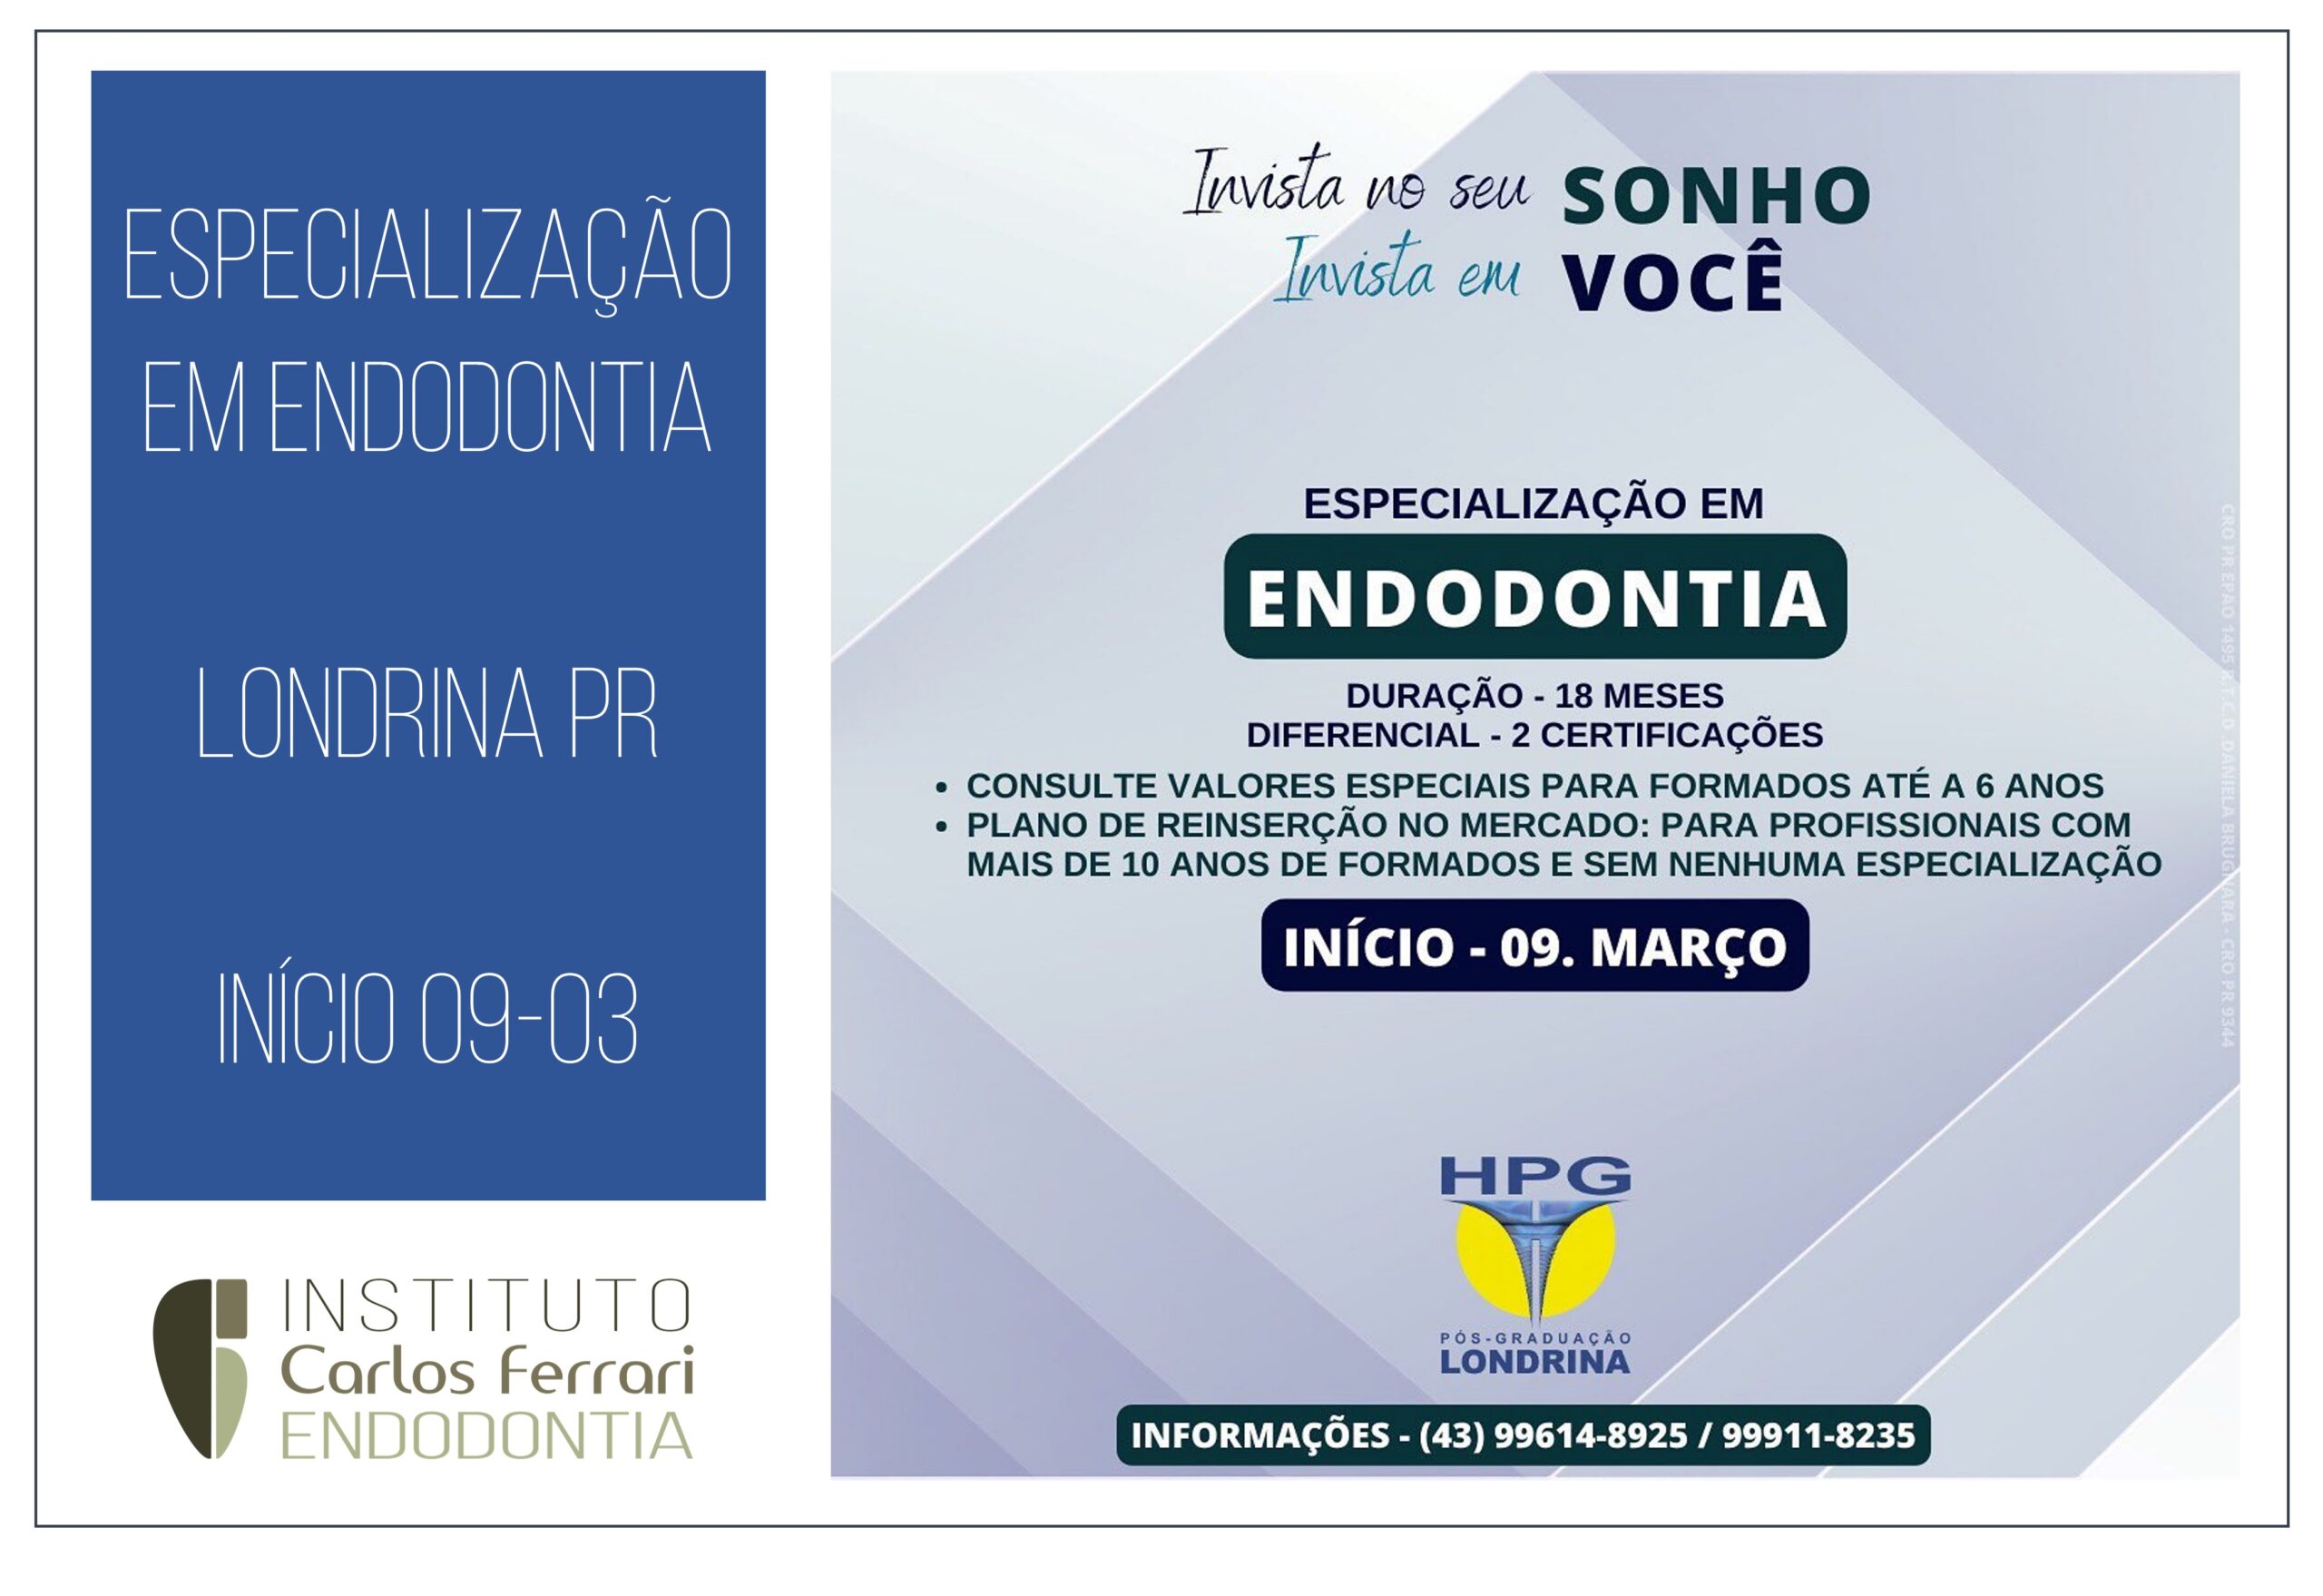 You are currently viewing Specialization in endodontics in Londrina PR.